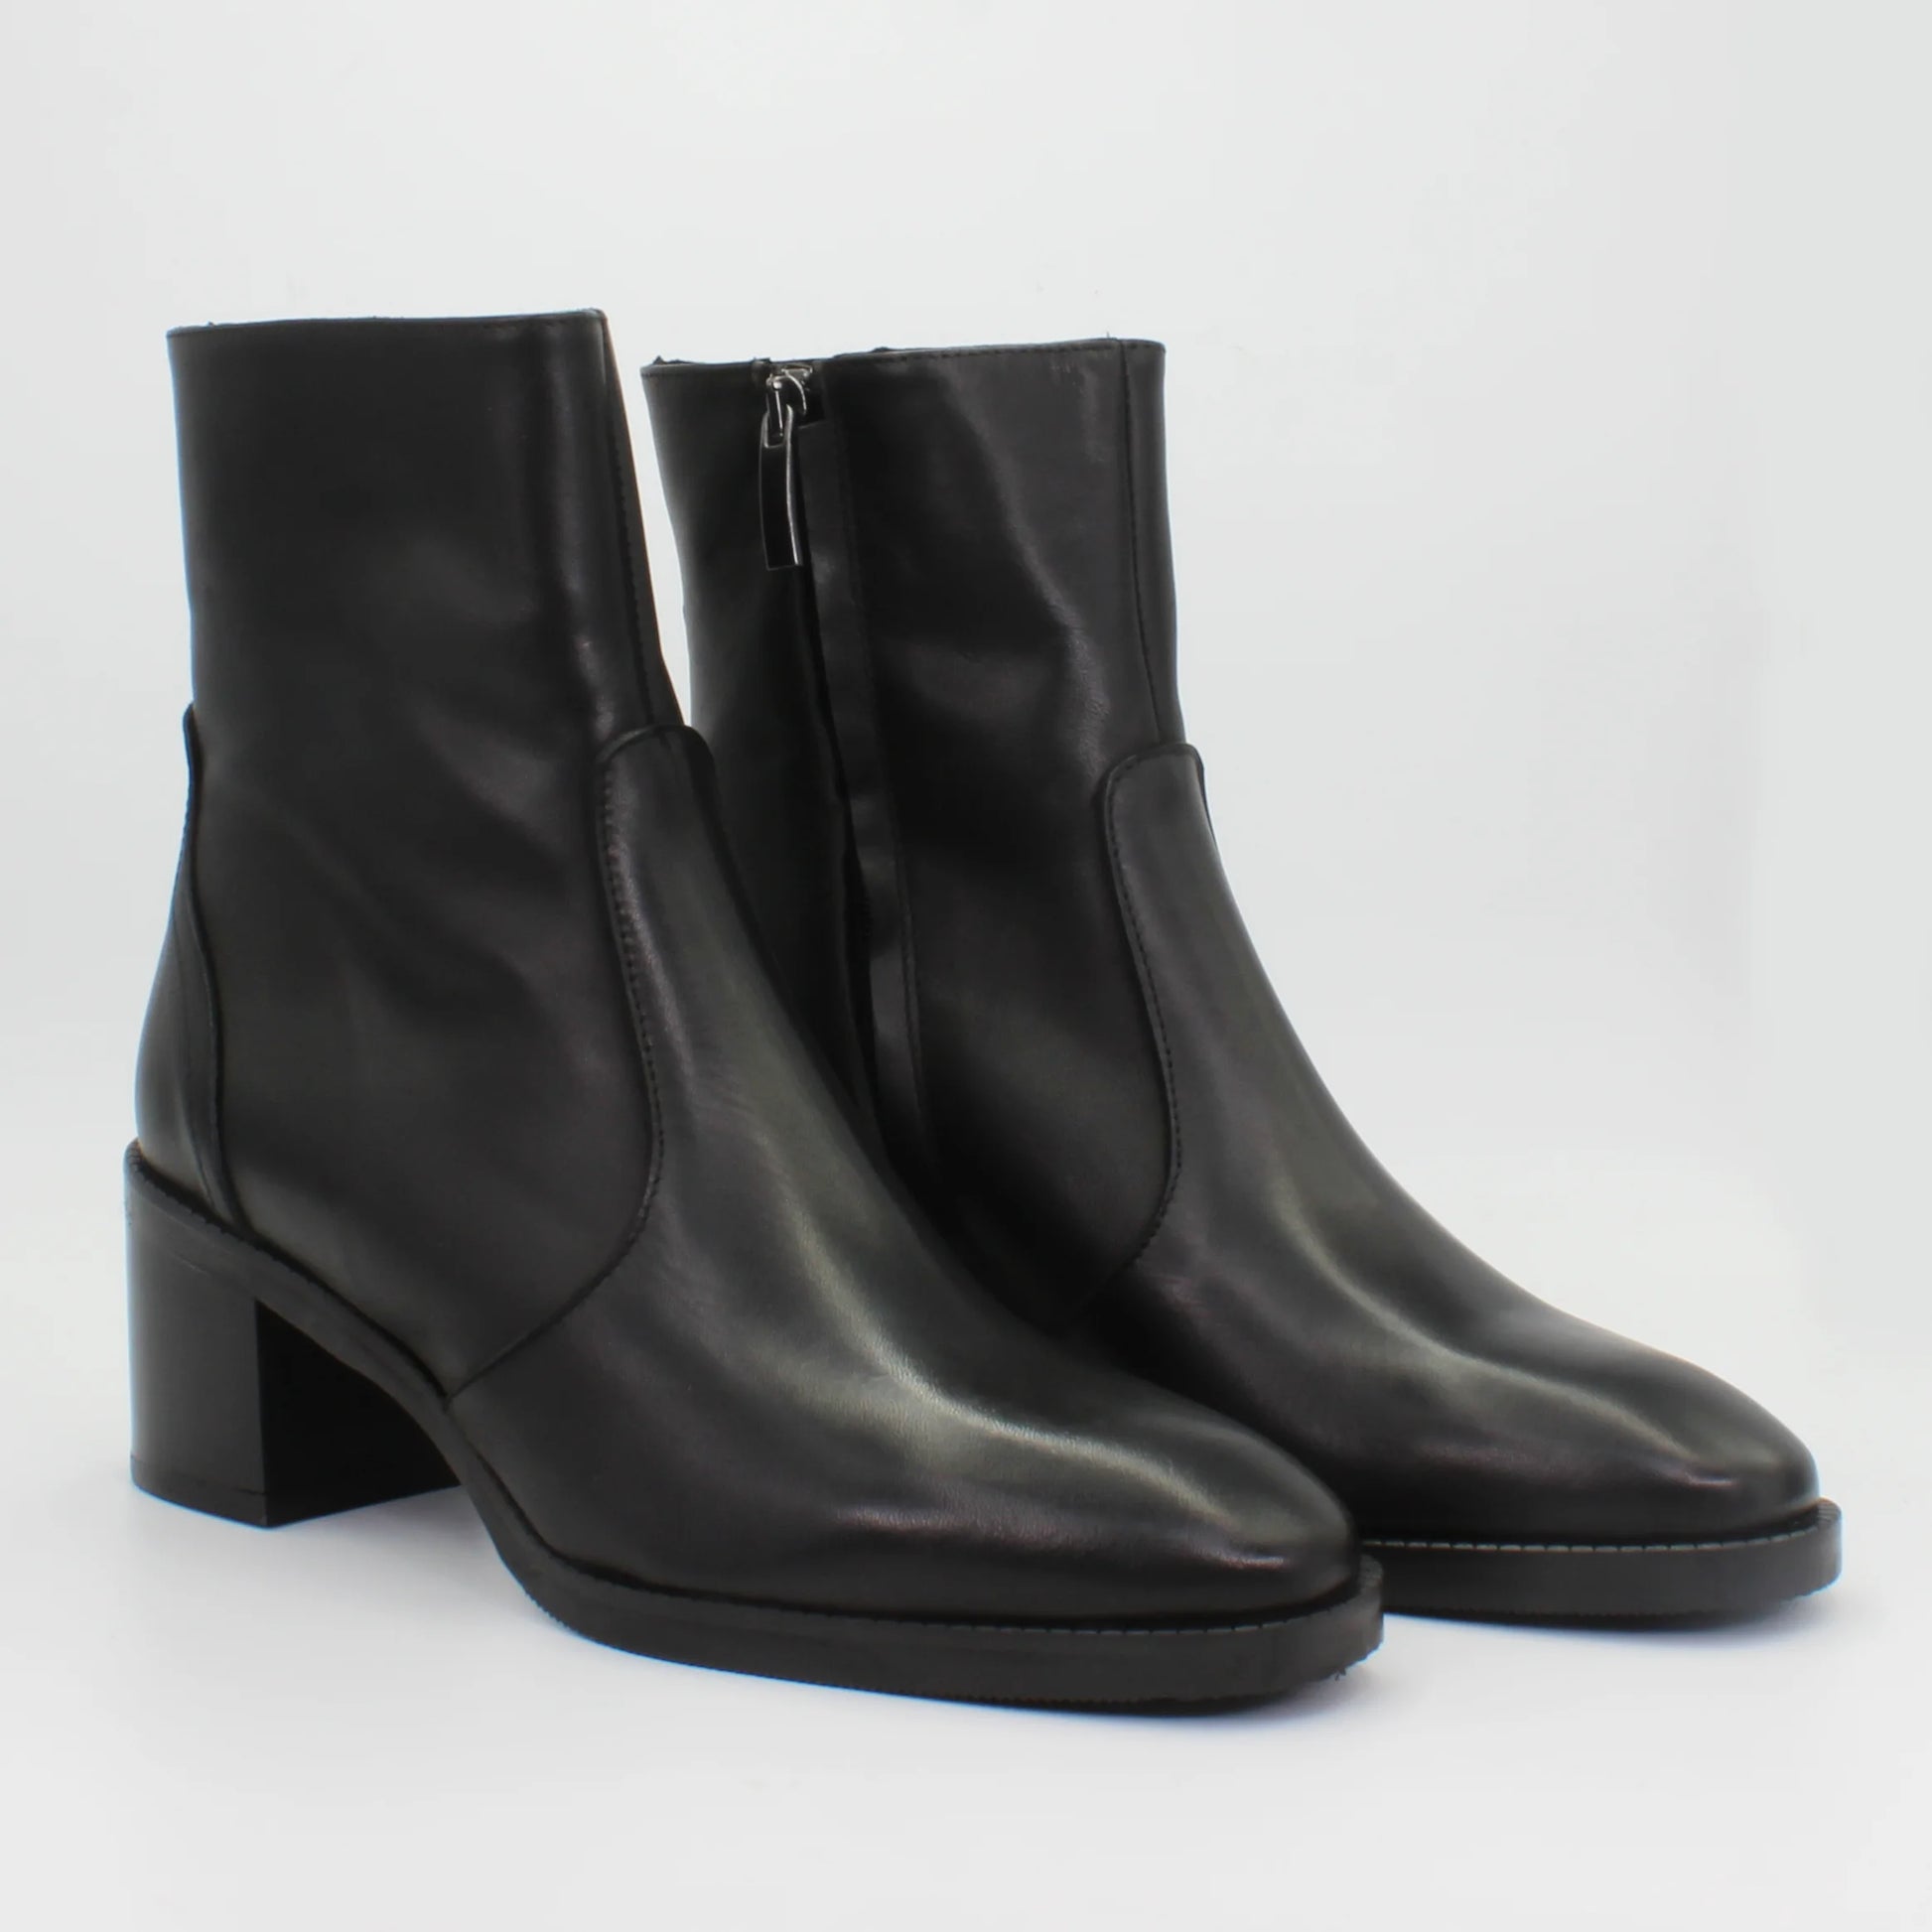 Shop Handmade Italian Leather Boot in Nero (GC3411) or browse our range of hand-made Italian boots for women in leather or suede in-store at Aliverti Cape Town, or shop online. We deliver in South Africa & offer multiple payment plans as well as accept multiple safe & secure payment methods.